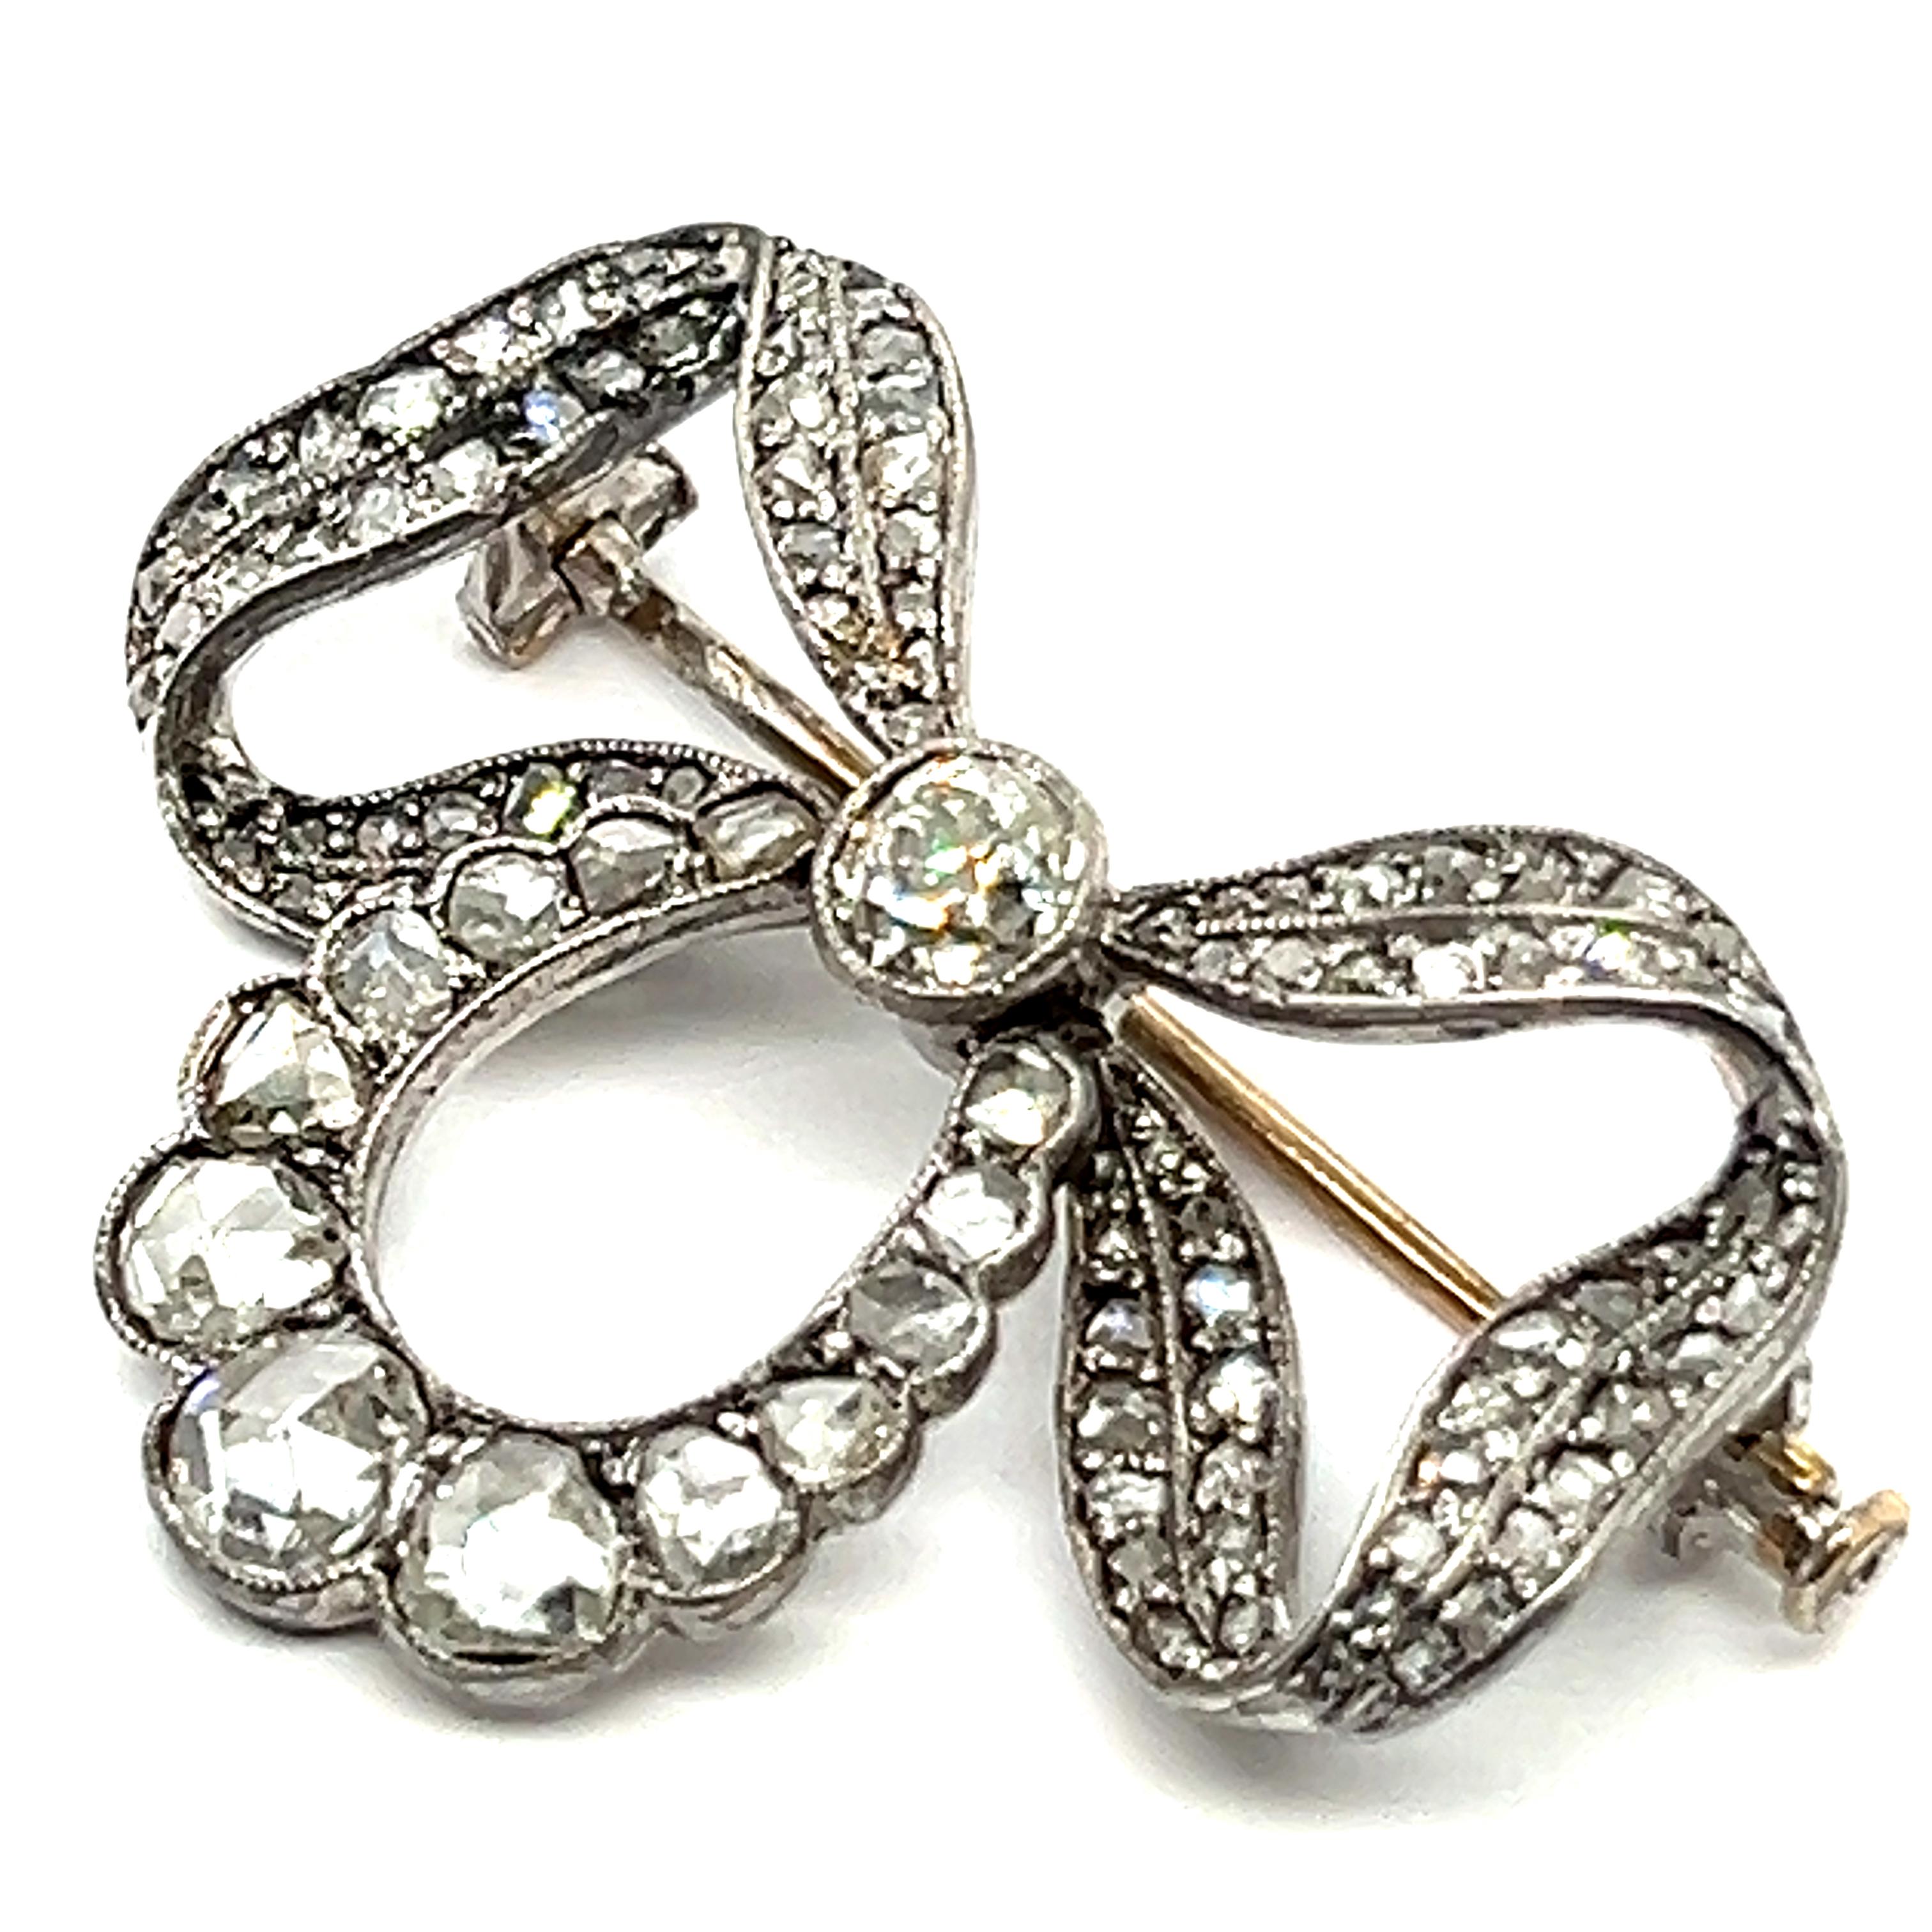 Embrace the elegance of this charming bow brooch. Reflecting the era's penchant for contrast and luxury, the combination of 18 Karat yellow gold and silver was favored for its ability to create striking visual effects. Adorned with an old and rose